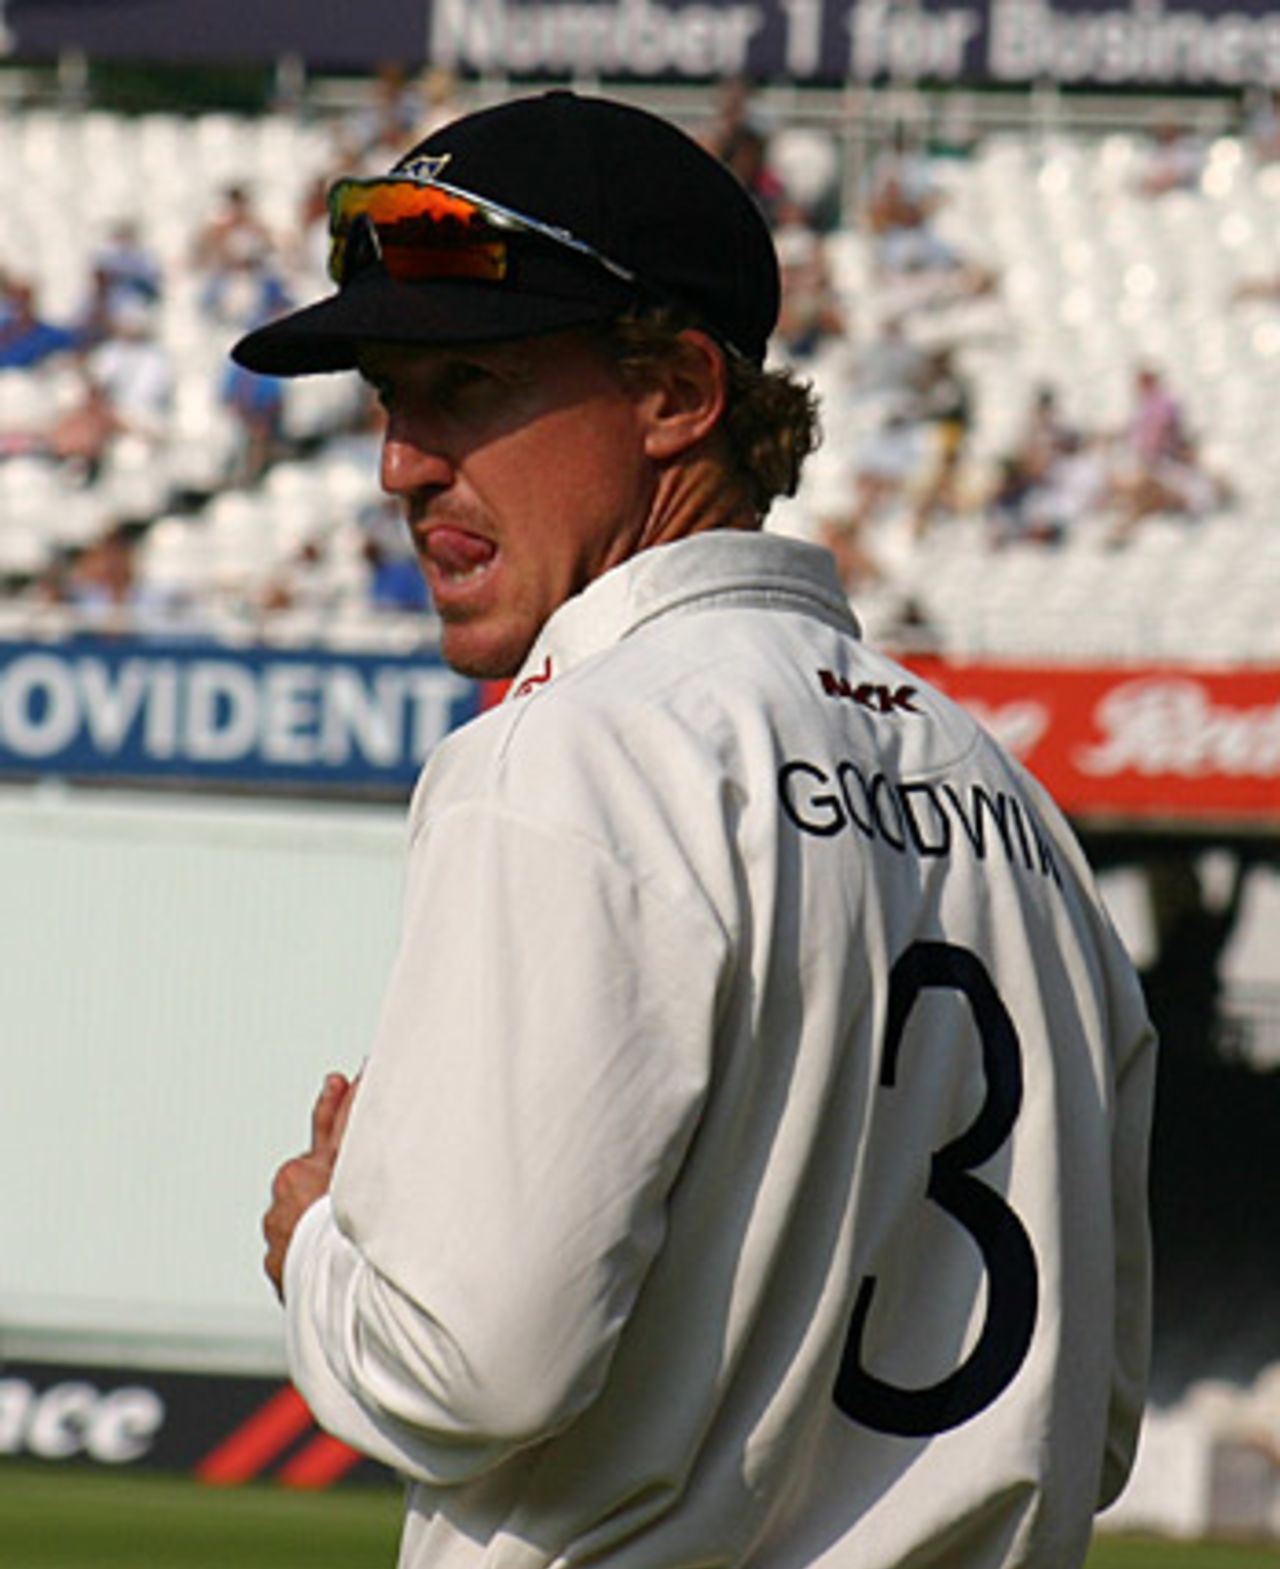 Murray Goodwin in the field, Middlesex v Sussex, Lord's, August 17, 2005